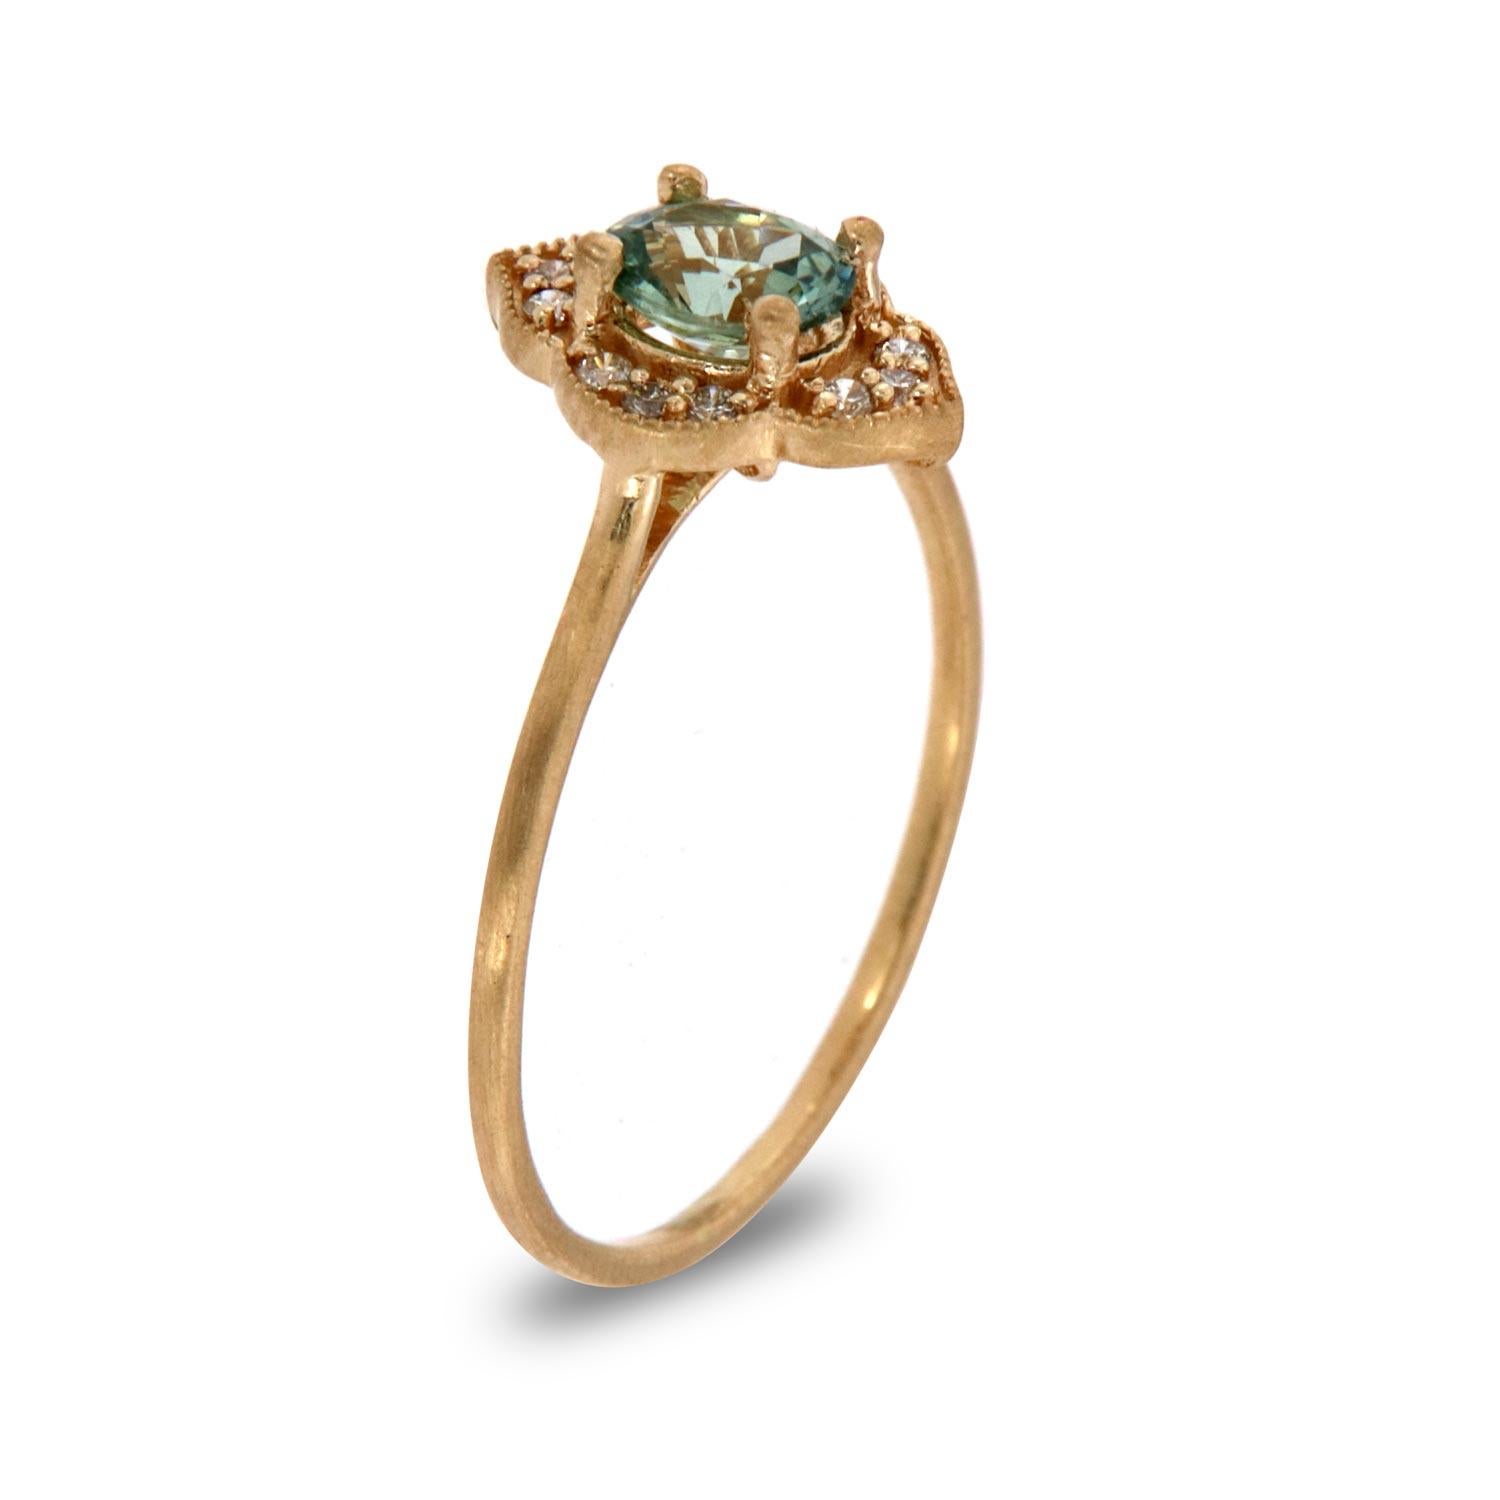 This petite rustic halo ring is impressive in its vintage appeal, featuring a natural teal oval sapphire, accented with milgrain and a round brilliant diamonds. Experience the difference in person!

Product details: 

Center Gemstone Type: